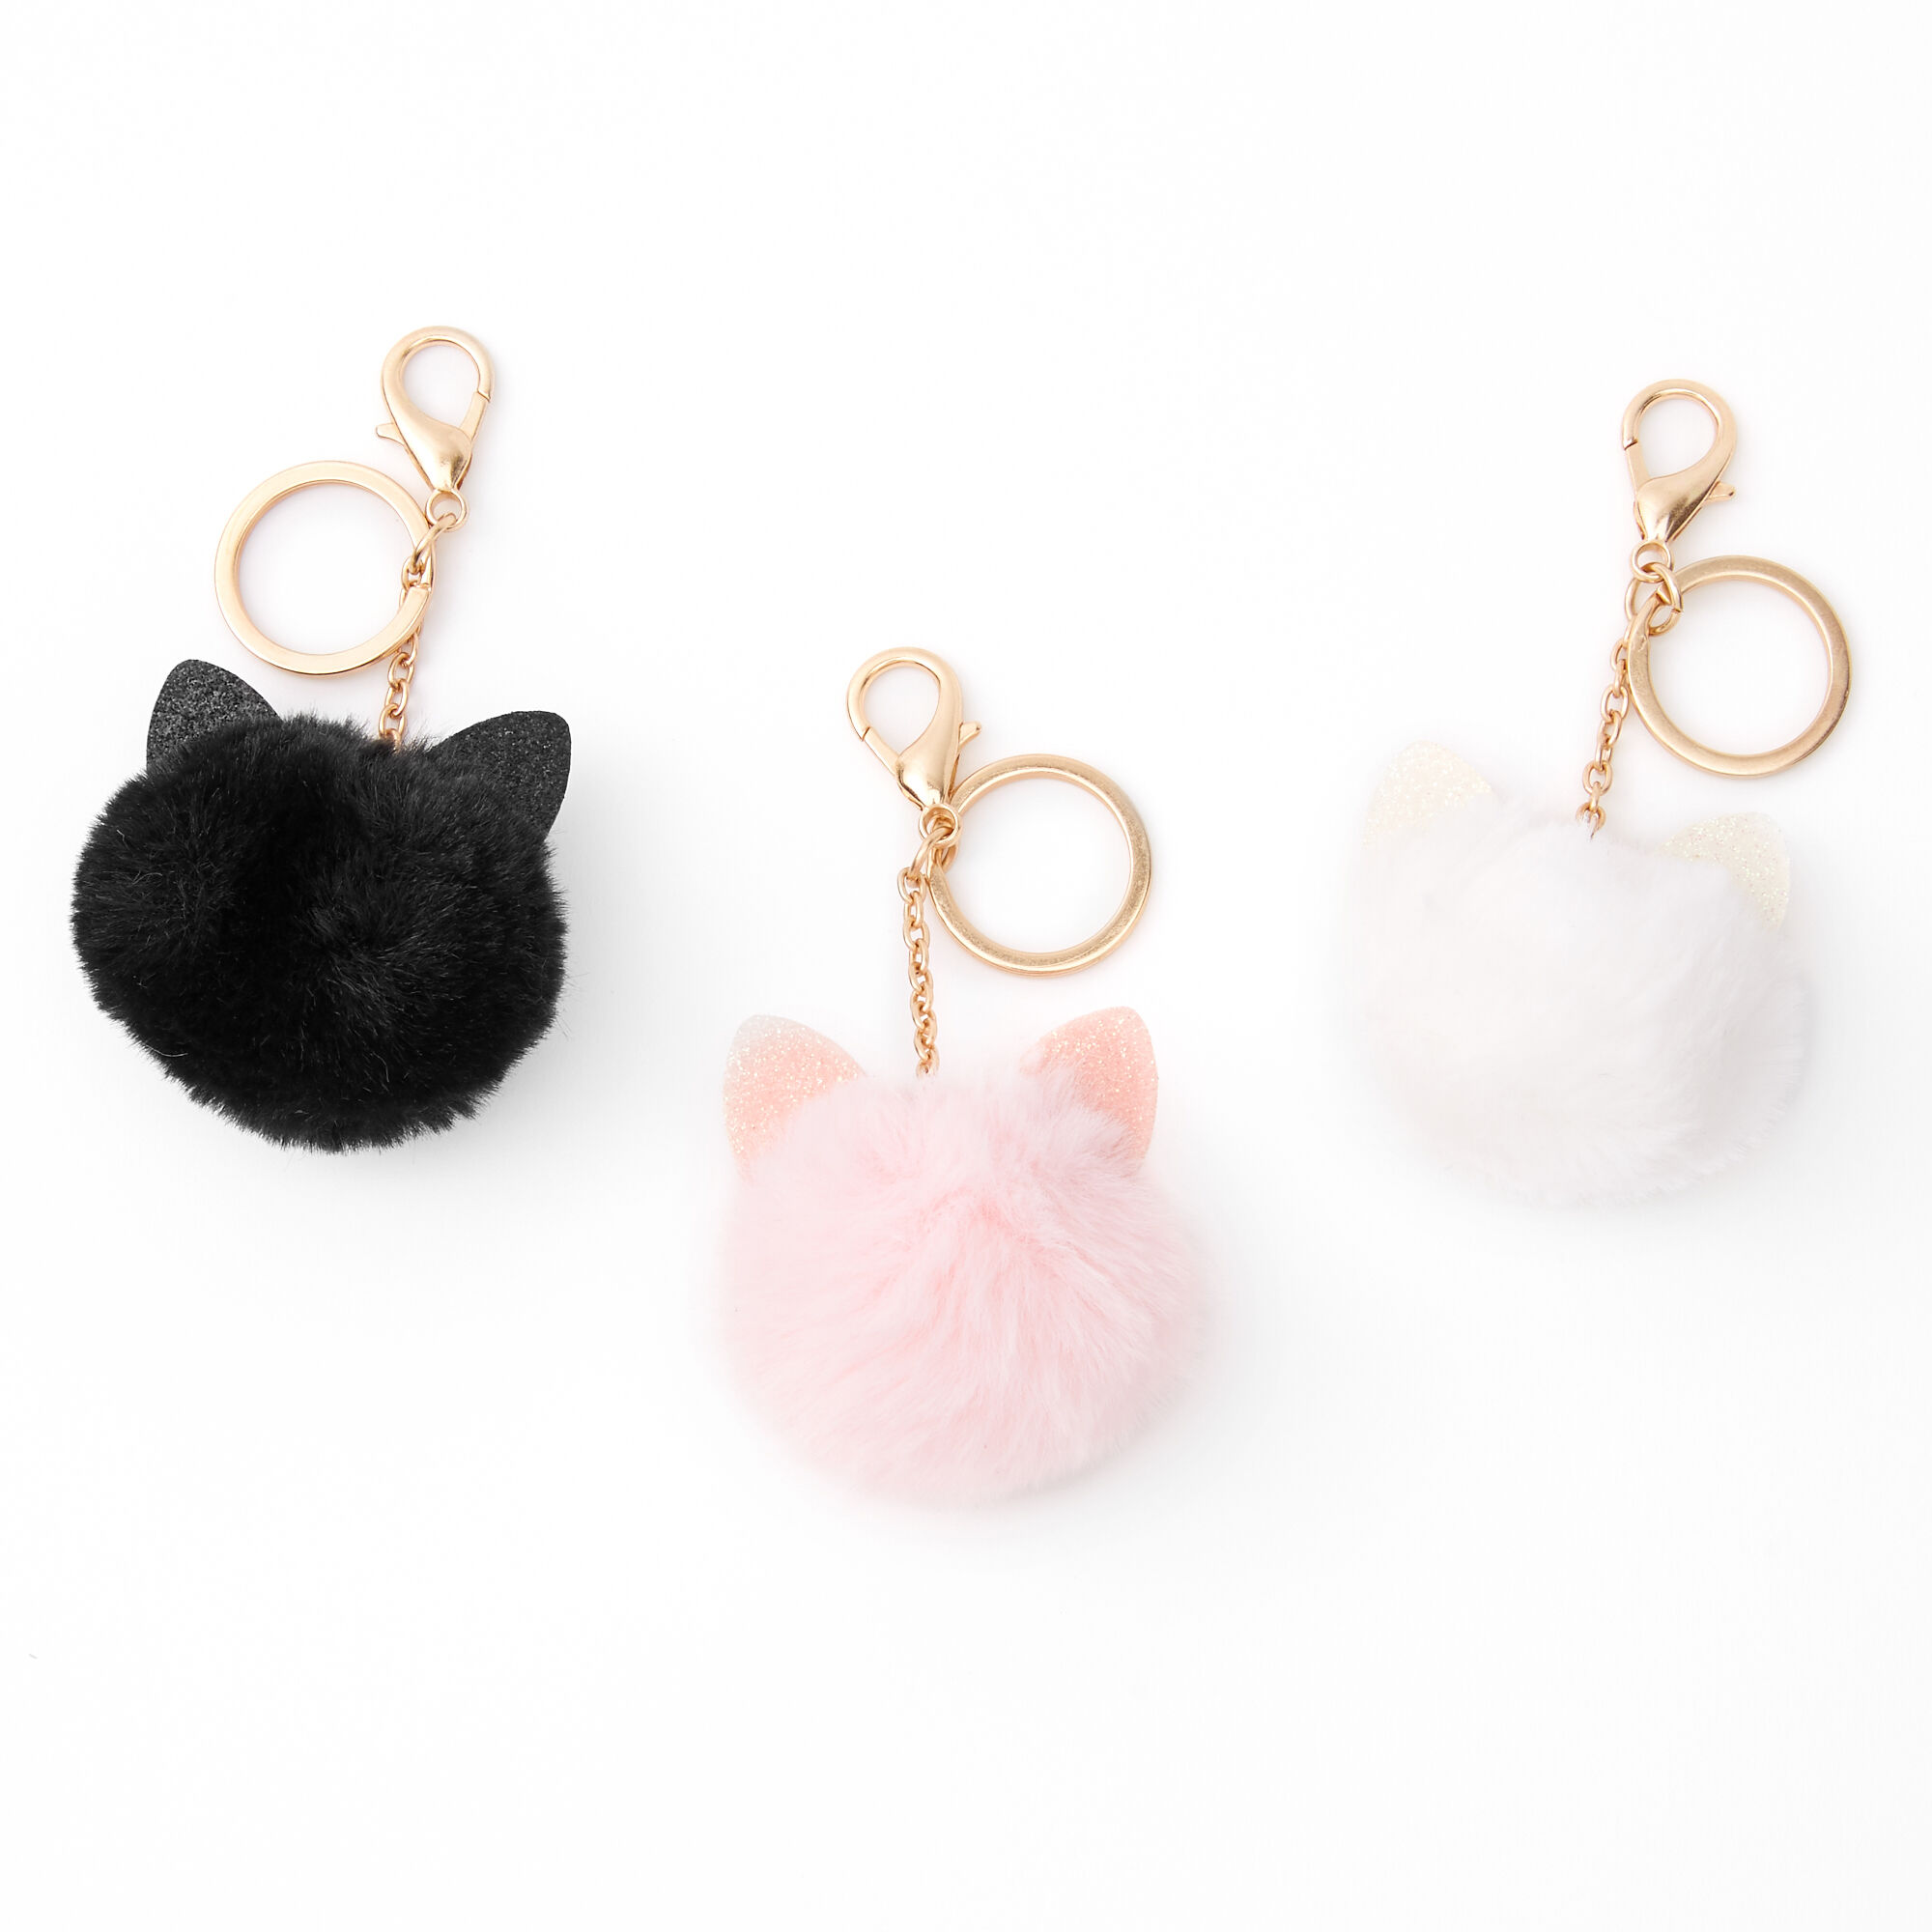 View Claires Pom Cat Keyrings 3 Pack Gold information